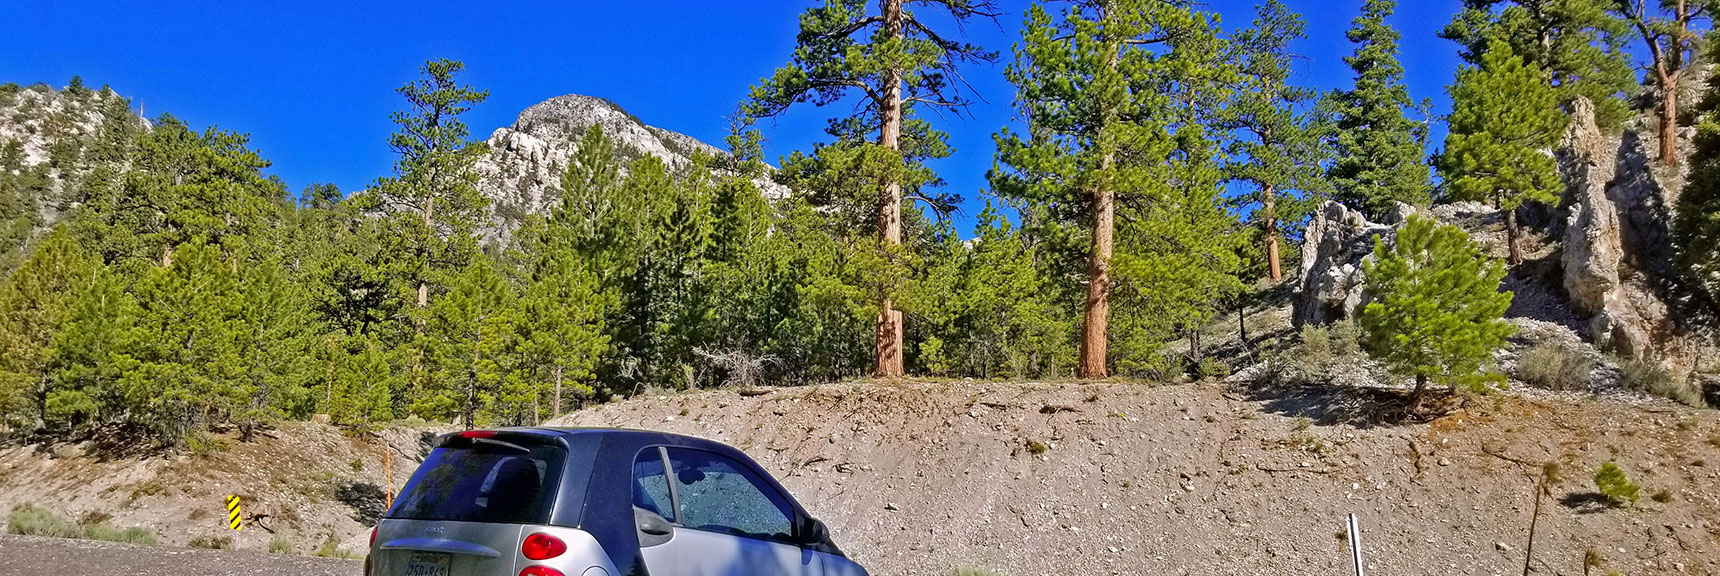 "The Beast" on Lee Canyon Road, Starting Point for Black Rock Sister Adventure | Black Rock Sister | Mt Charleston Wilderness | Lee Canyon | Spring Mountains, Nevada